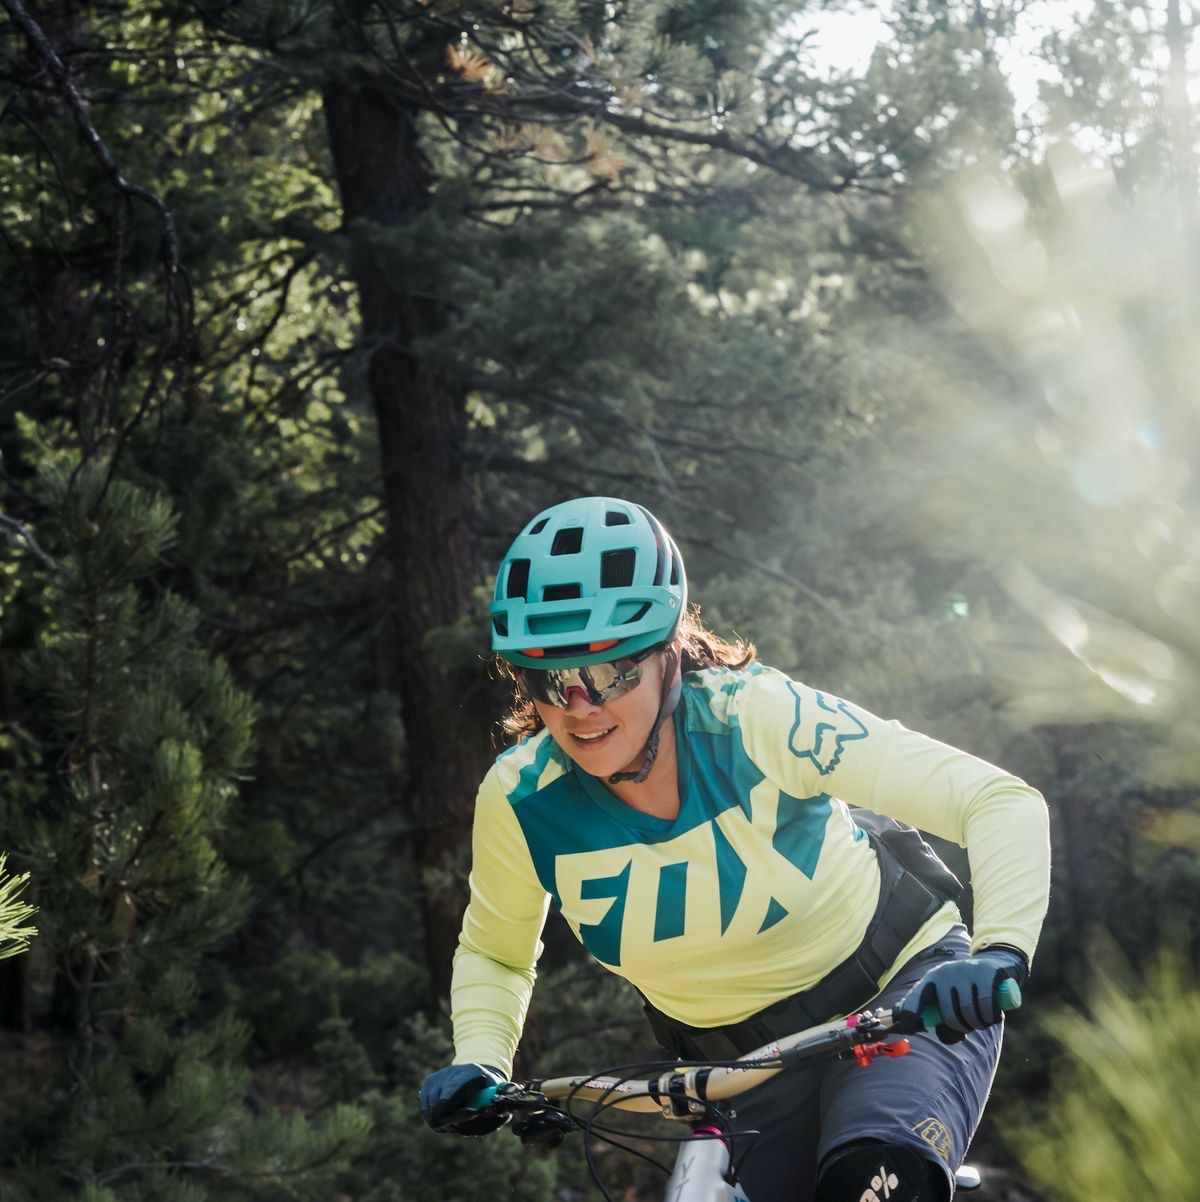 9 Mountain Biking Tips for Beginners: Get Started Trail Riding